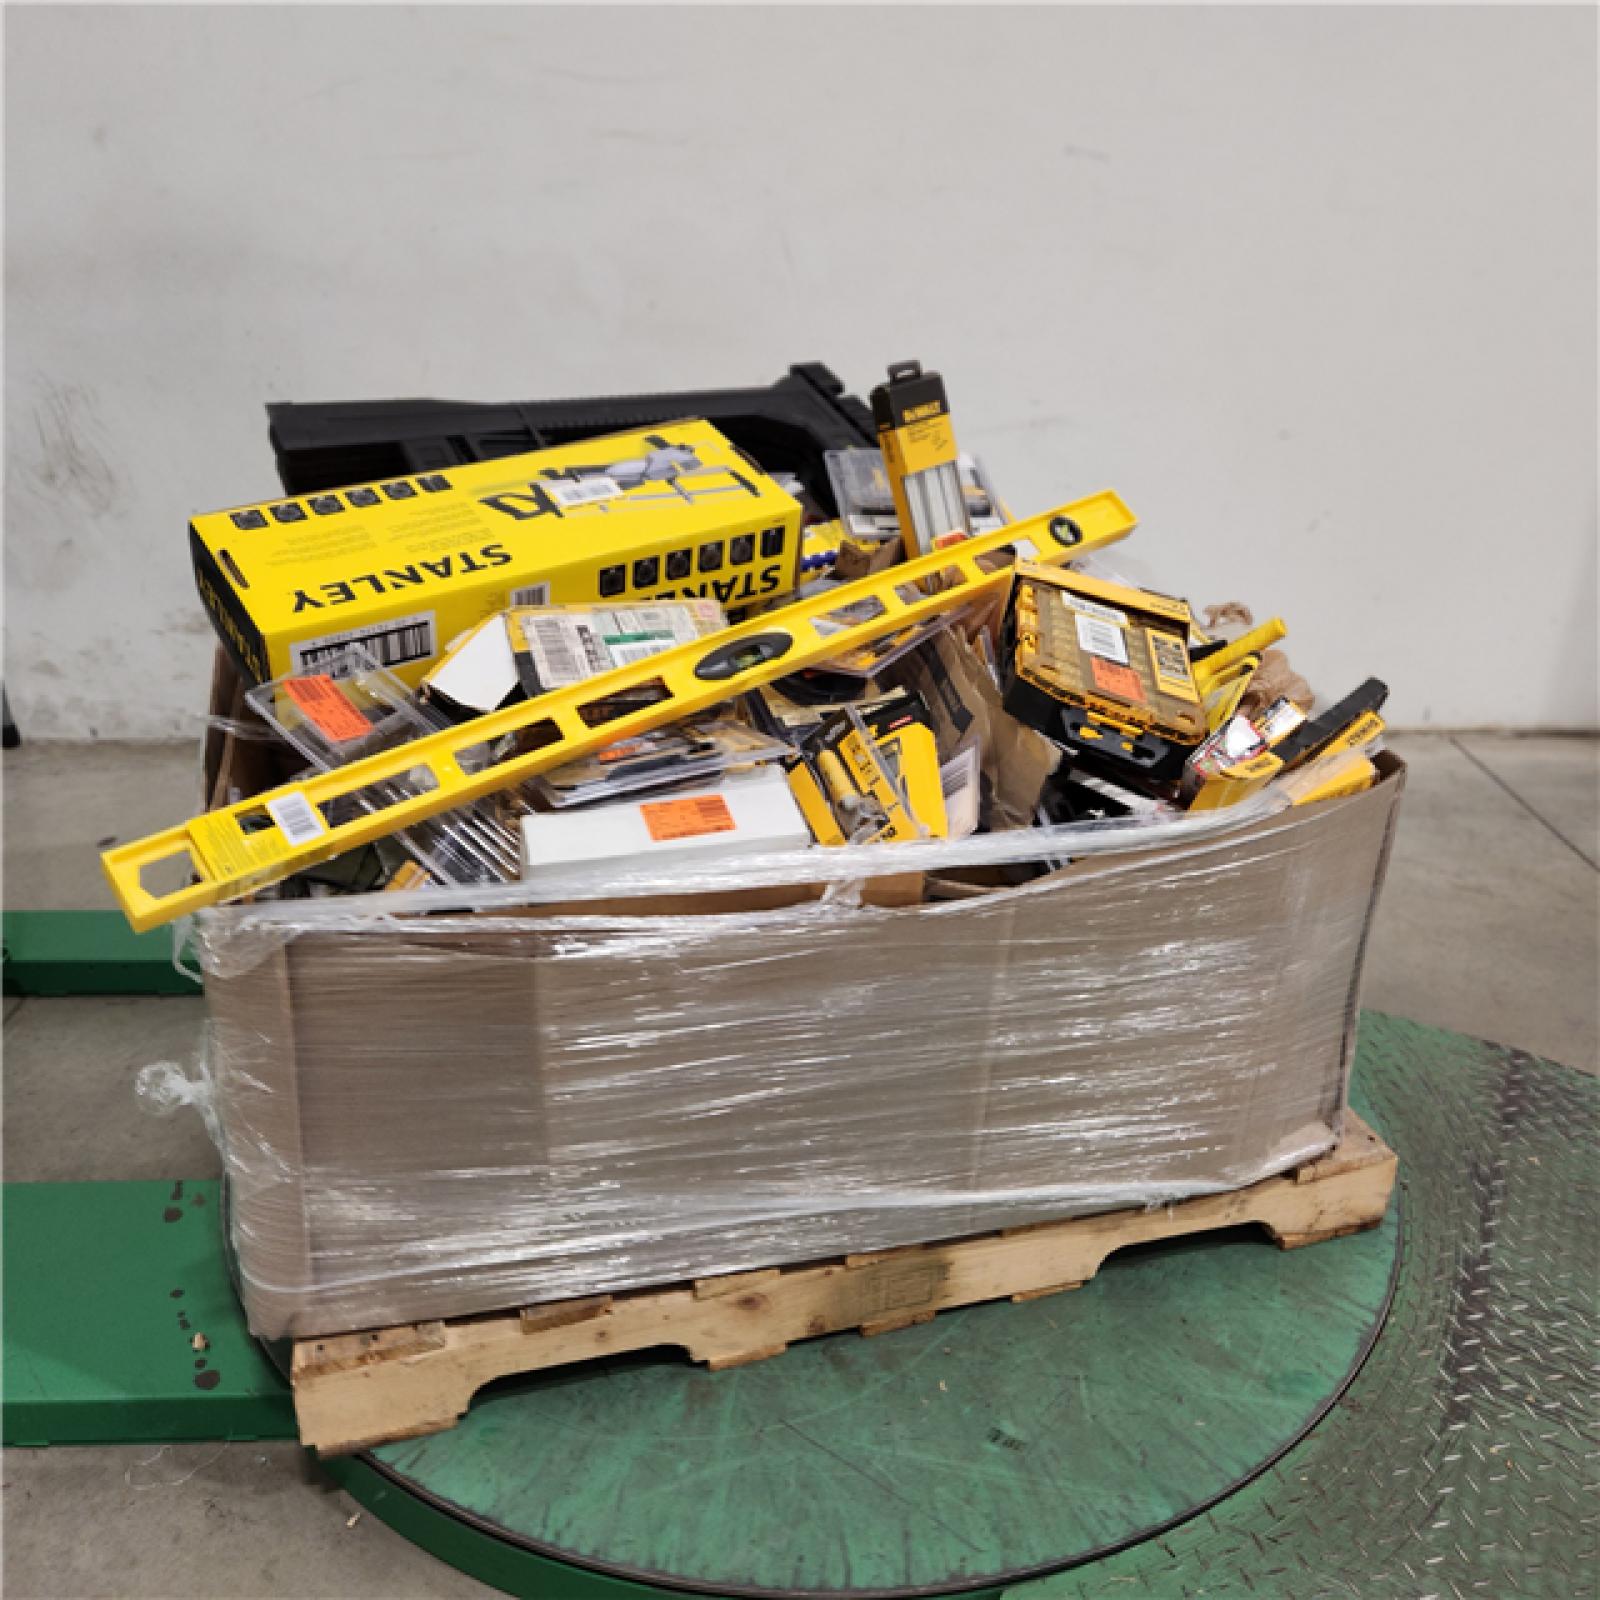 DALLAS LOCATION AS-IS TOOL PALLET